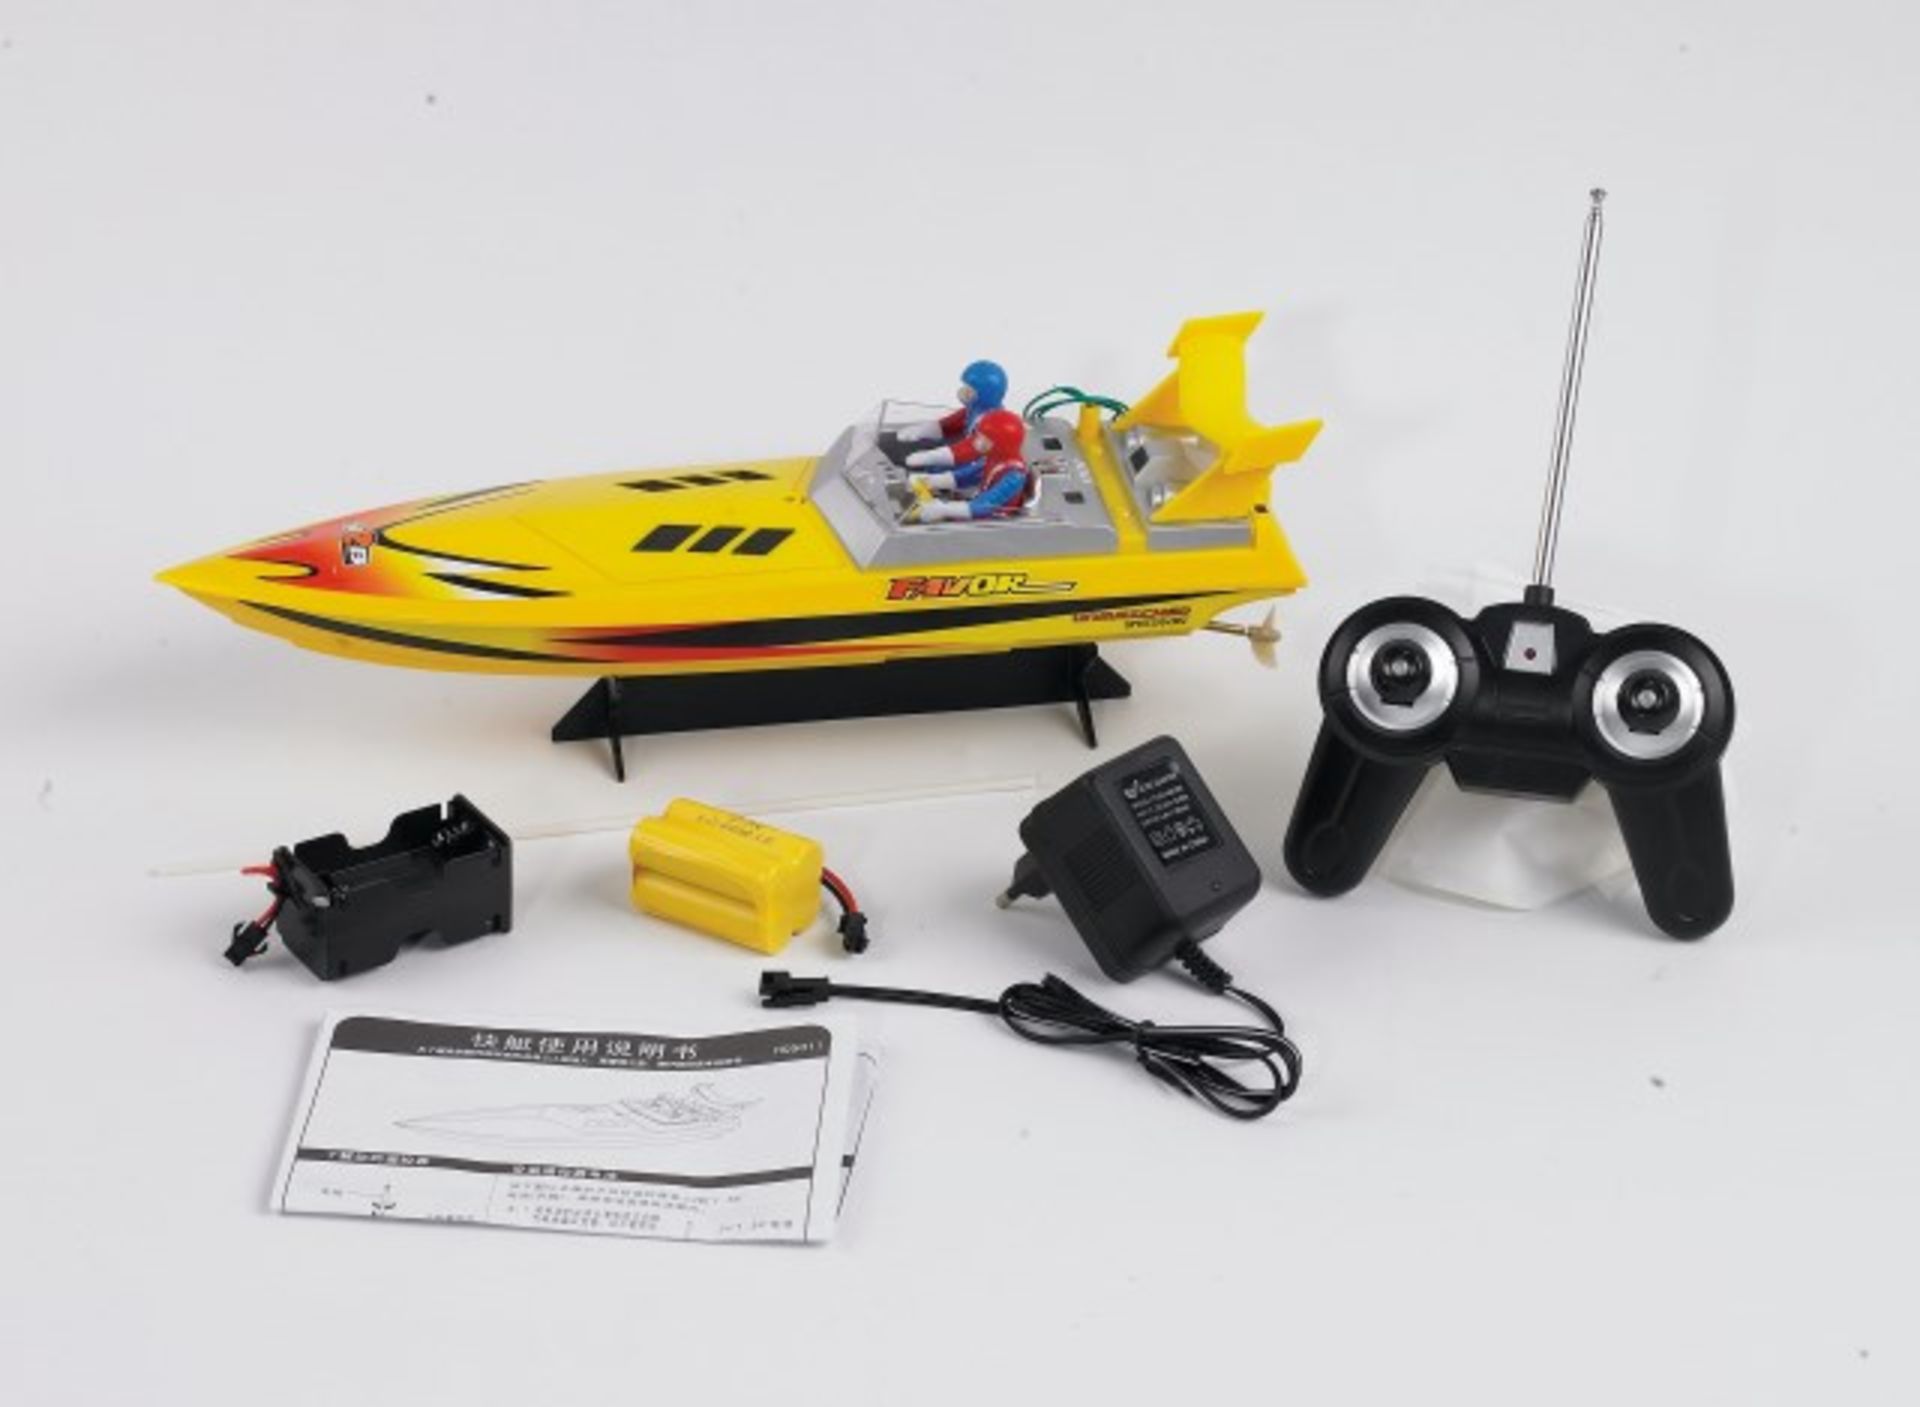 V Grade A R/C 25 km/hour Model Power Boat With Approx 100 metre control X 2 YOUR BID PRICE TO BE